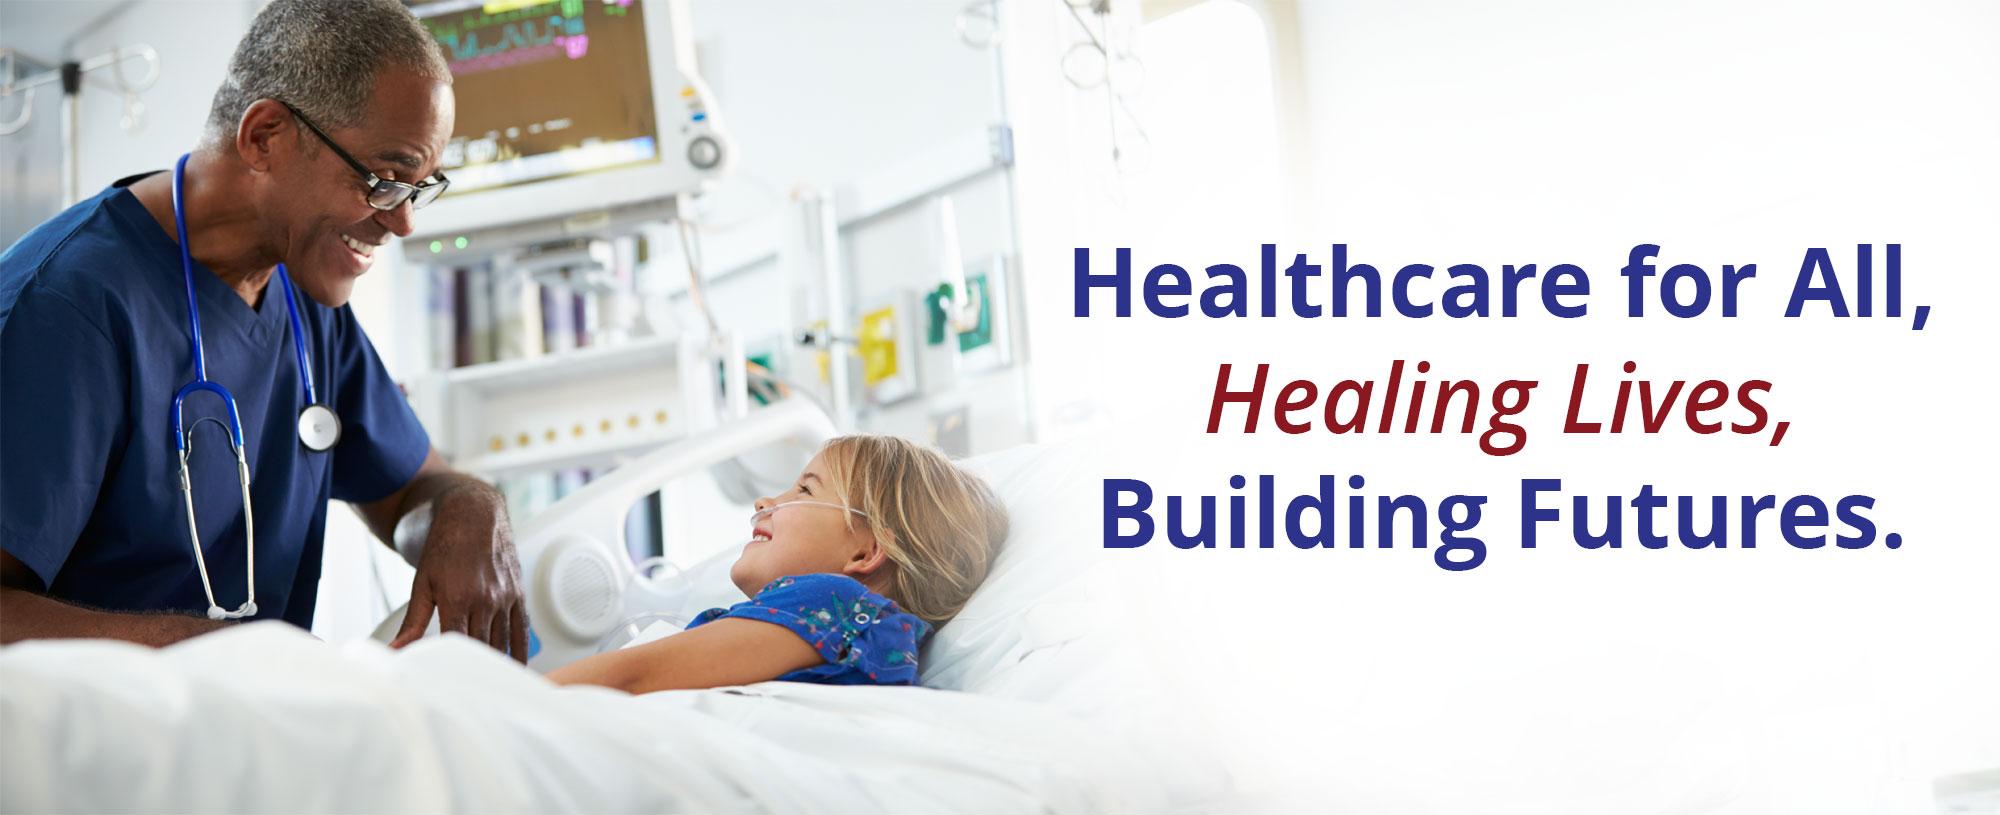 Healthcare for All, Healing Lives, Building Futures.